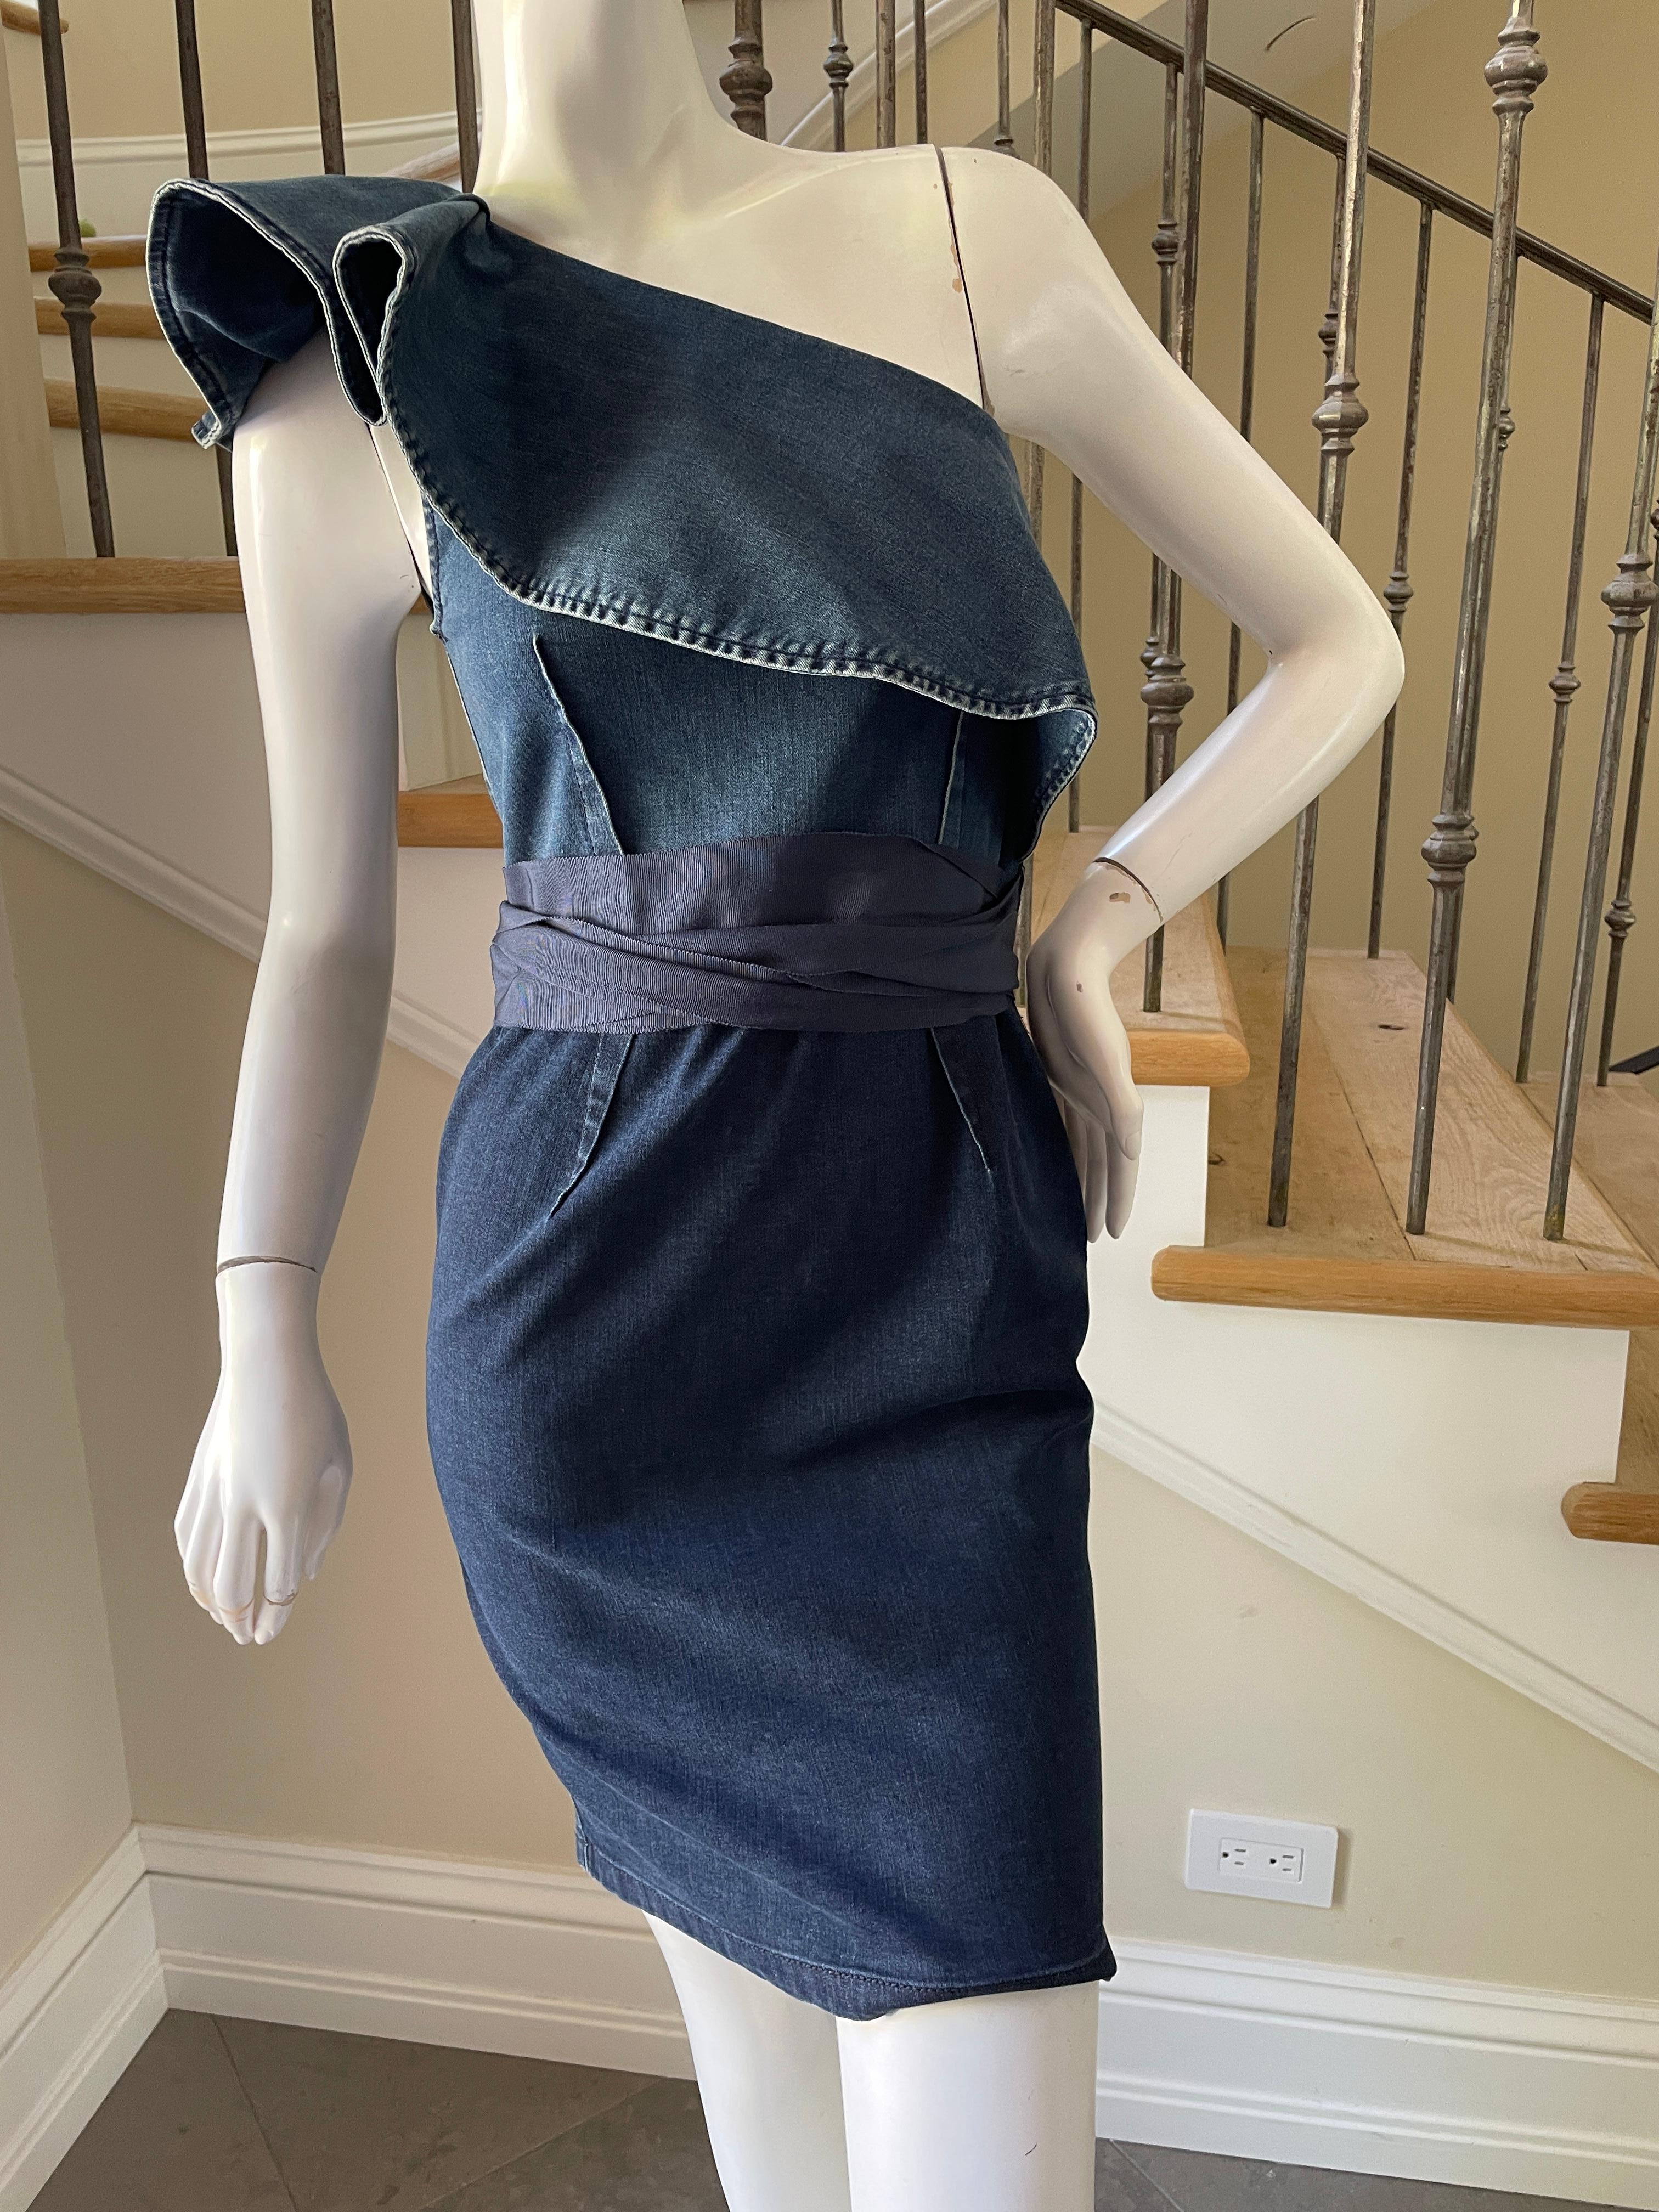 Lanvin by Alber Elbaz Vintage One Shoulder Ruffled Denim Dress In Good Condition For Sale In Cloverdale, CA